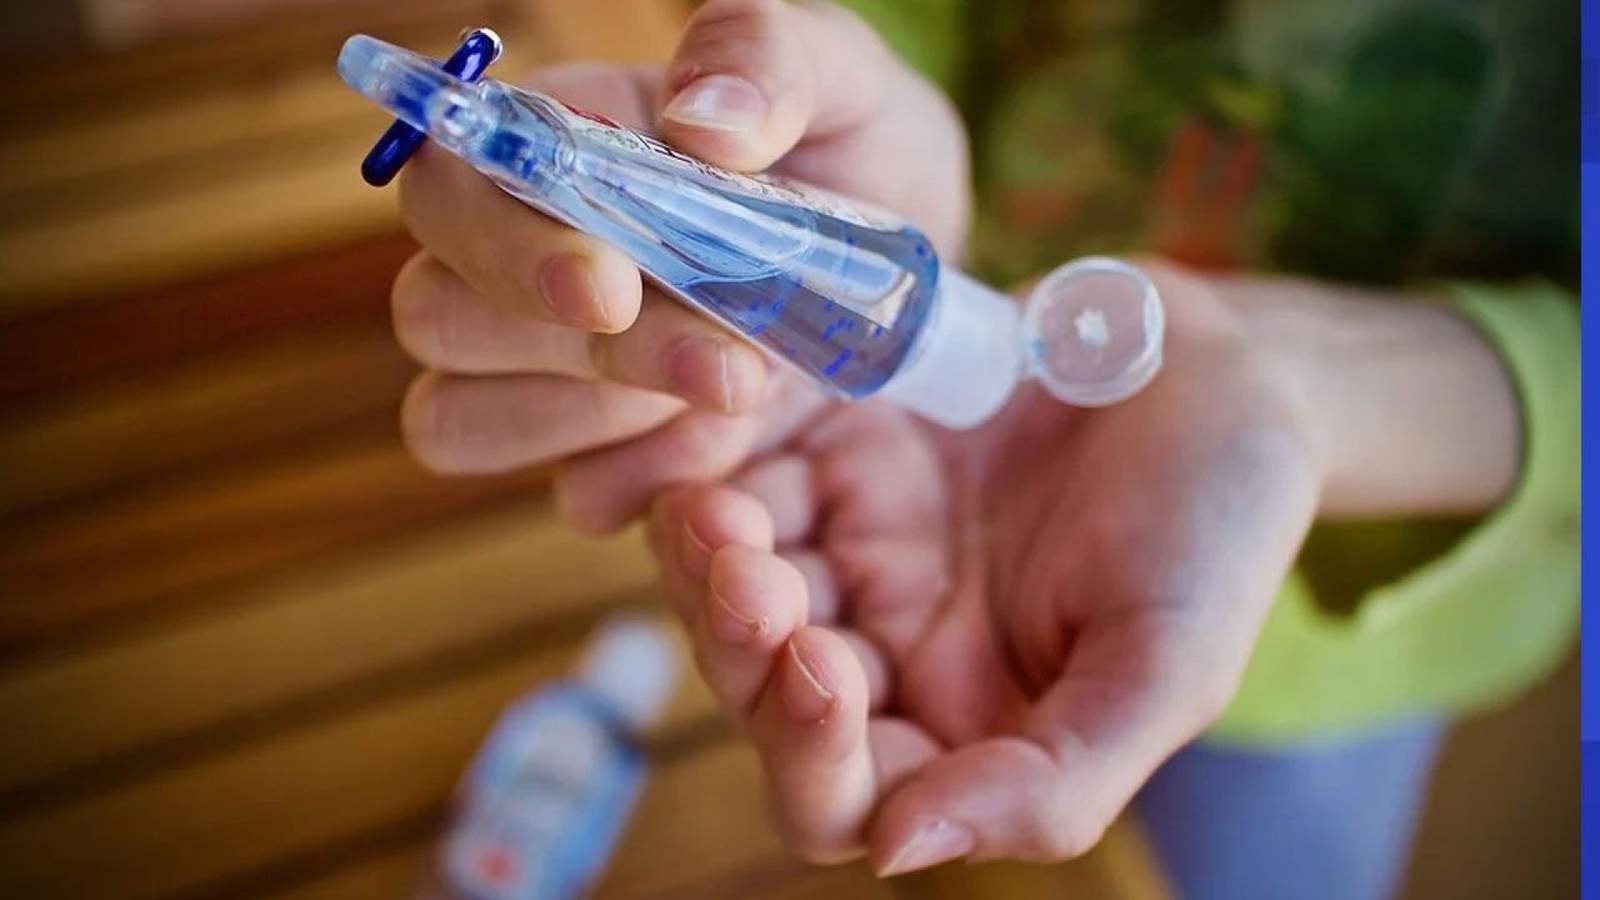 Updated: More than 200 hand sanitizers listed on FDA’s ‘do-not-use’ list